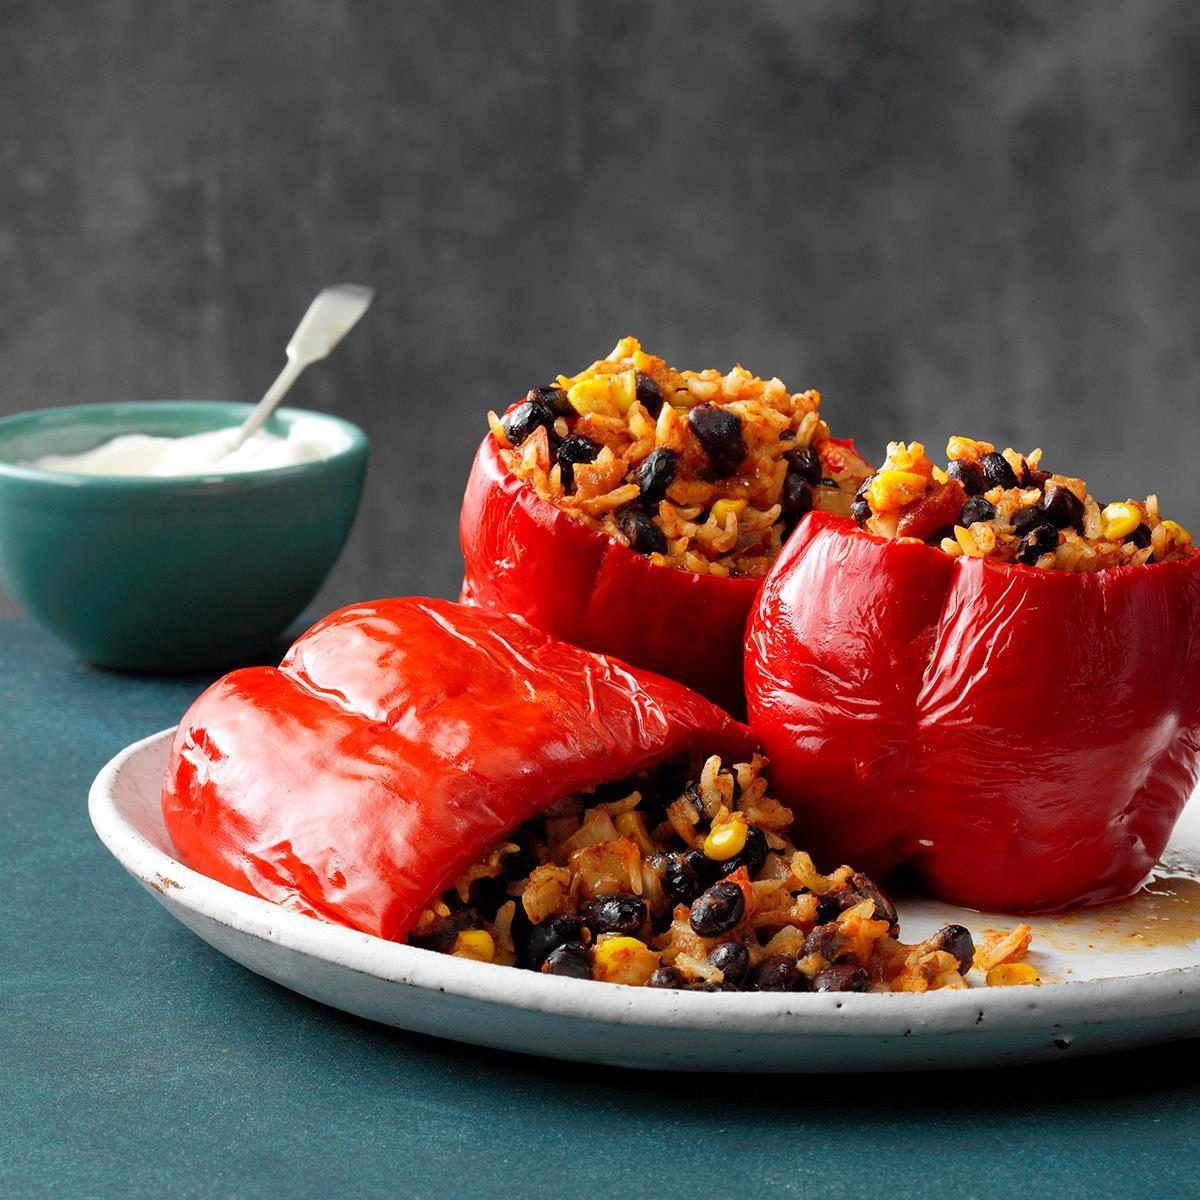 Day 7: Slow-Cooked Stuffed Peppers